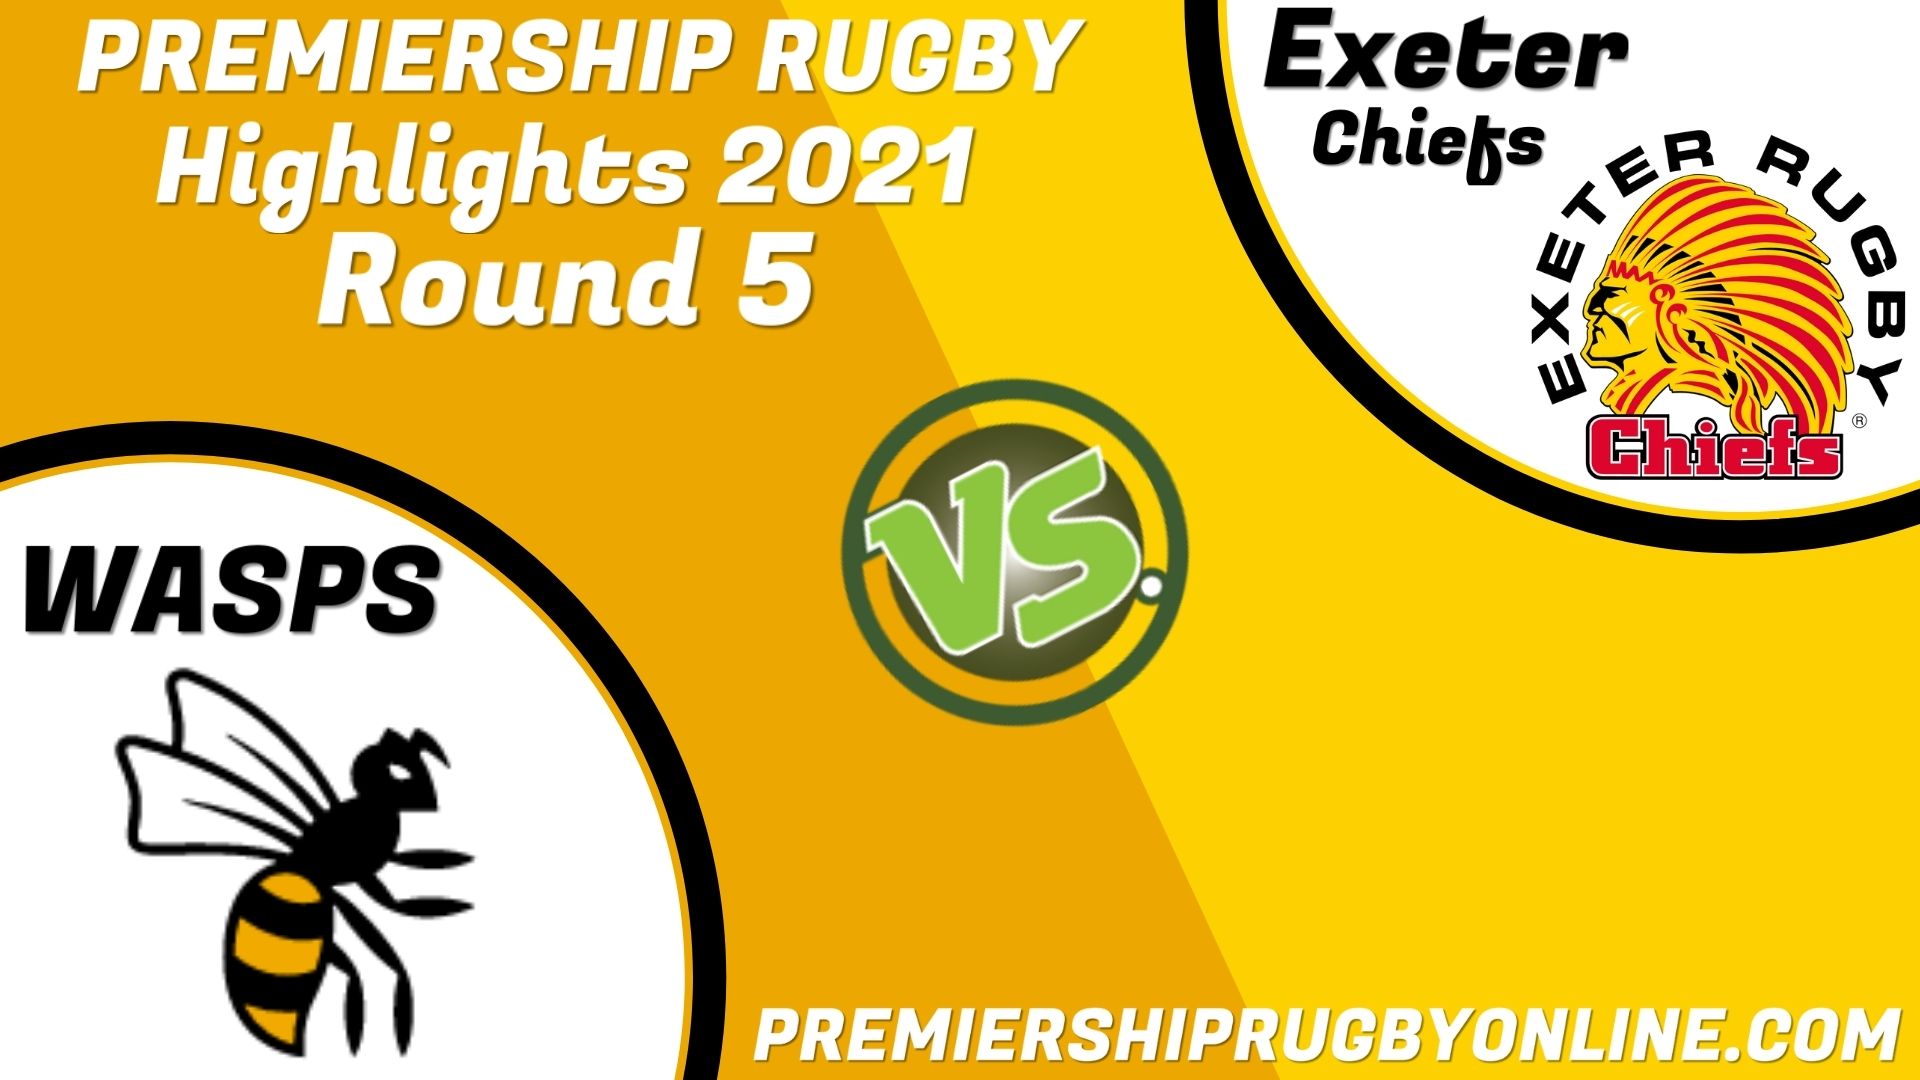 Wasps Vs Exeter Chiefs Highlights 2021 RD 5